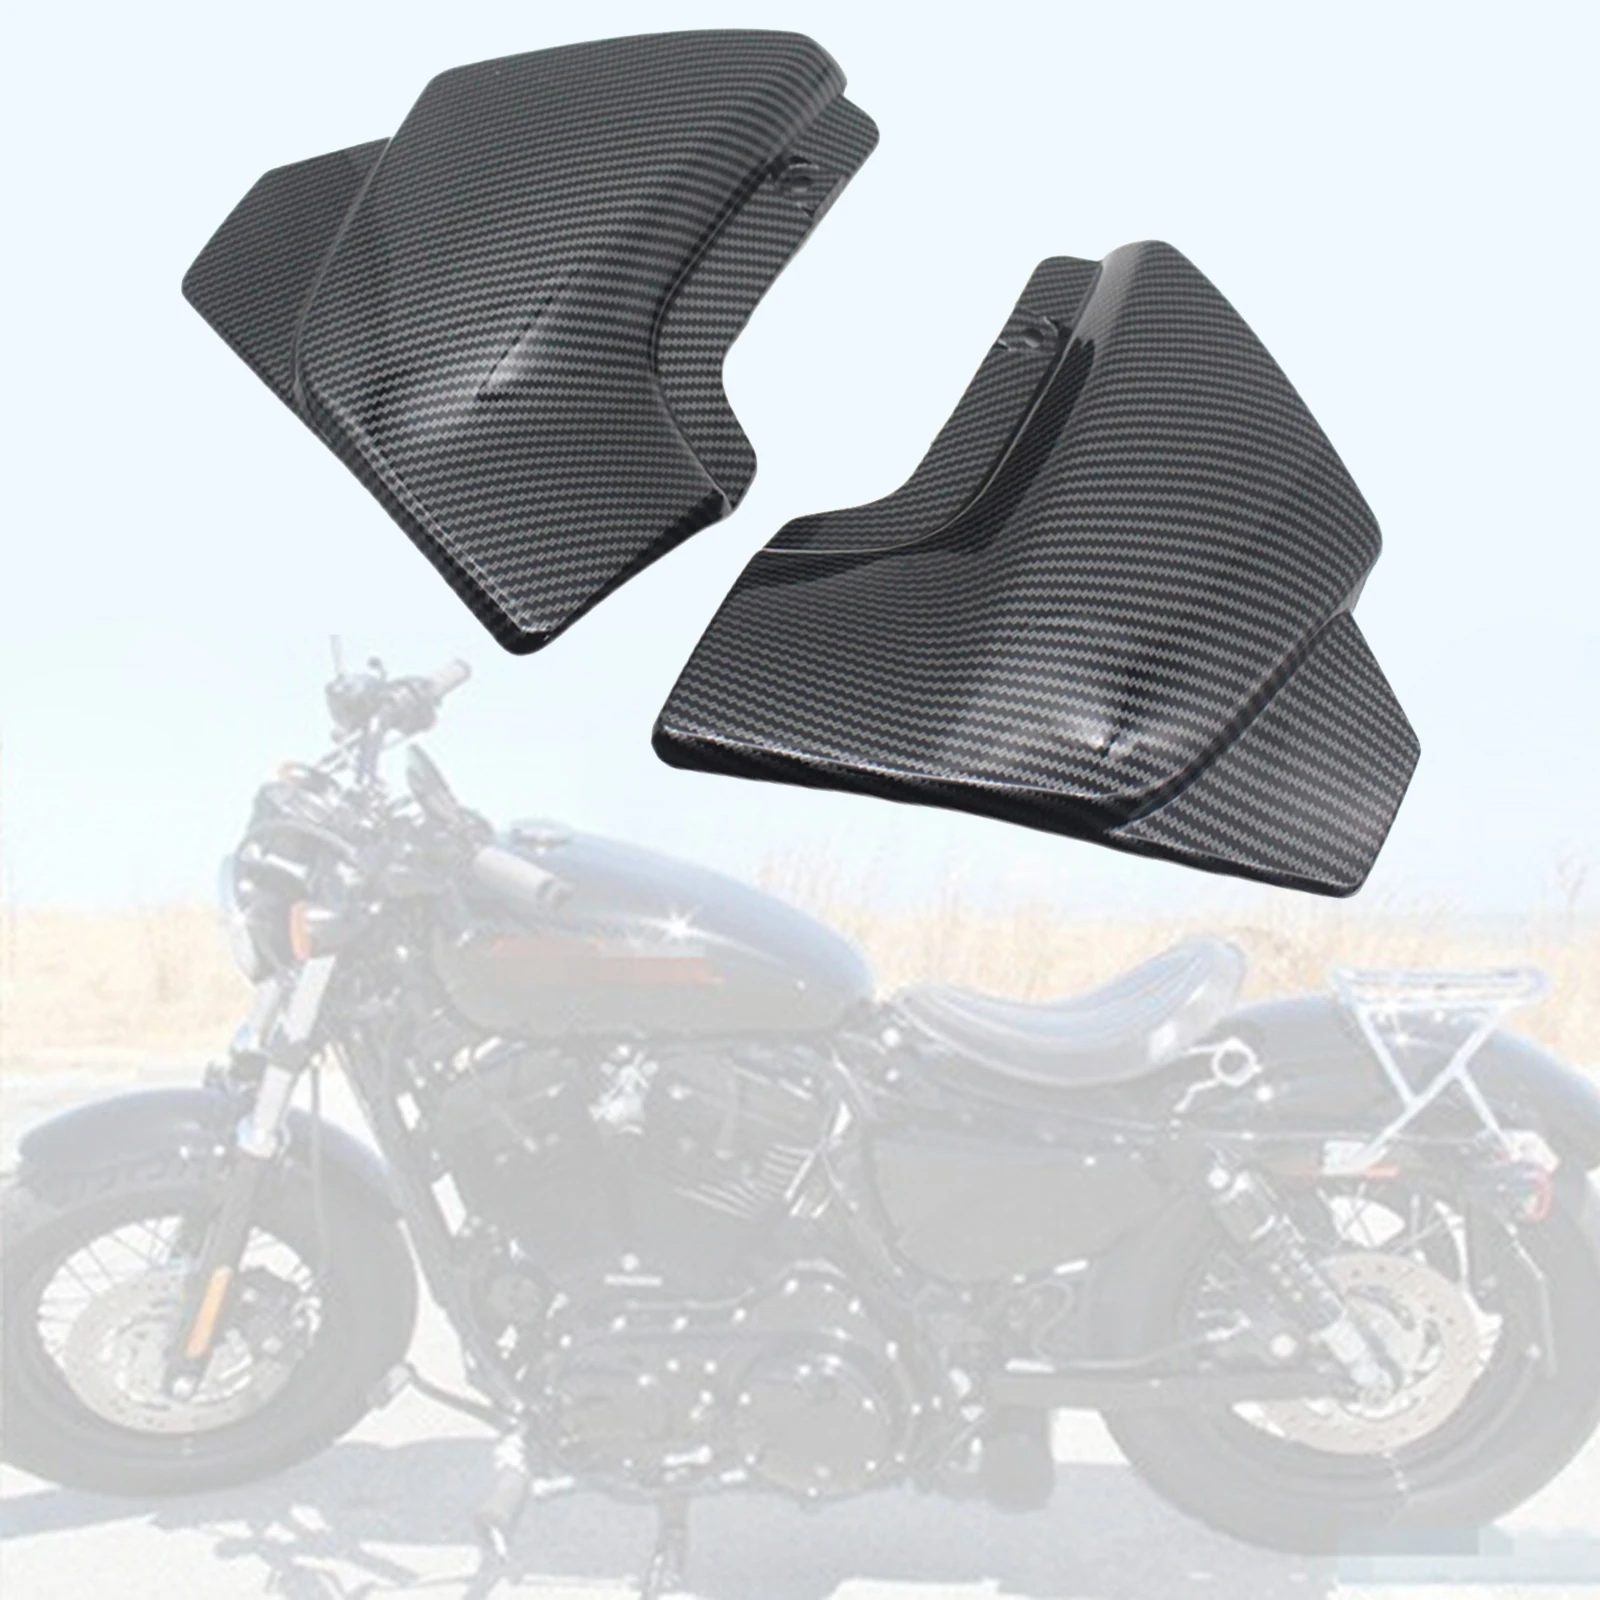 Paint Side Panel Guard Cover Spoiler Kit for Honda VTEC III CB 400 SF 2005 2006 Frame Guard Cowl Trim Motorcycle Accessories